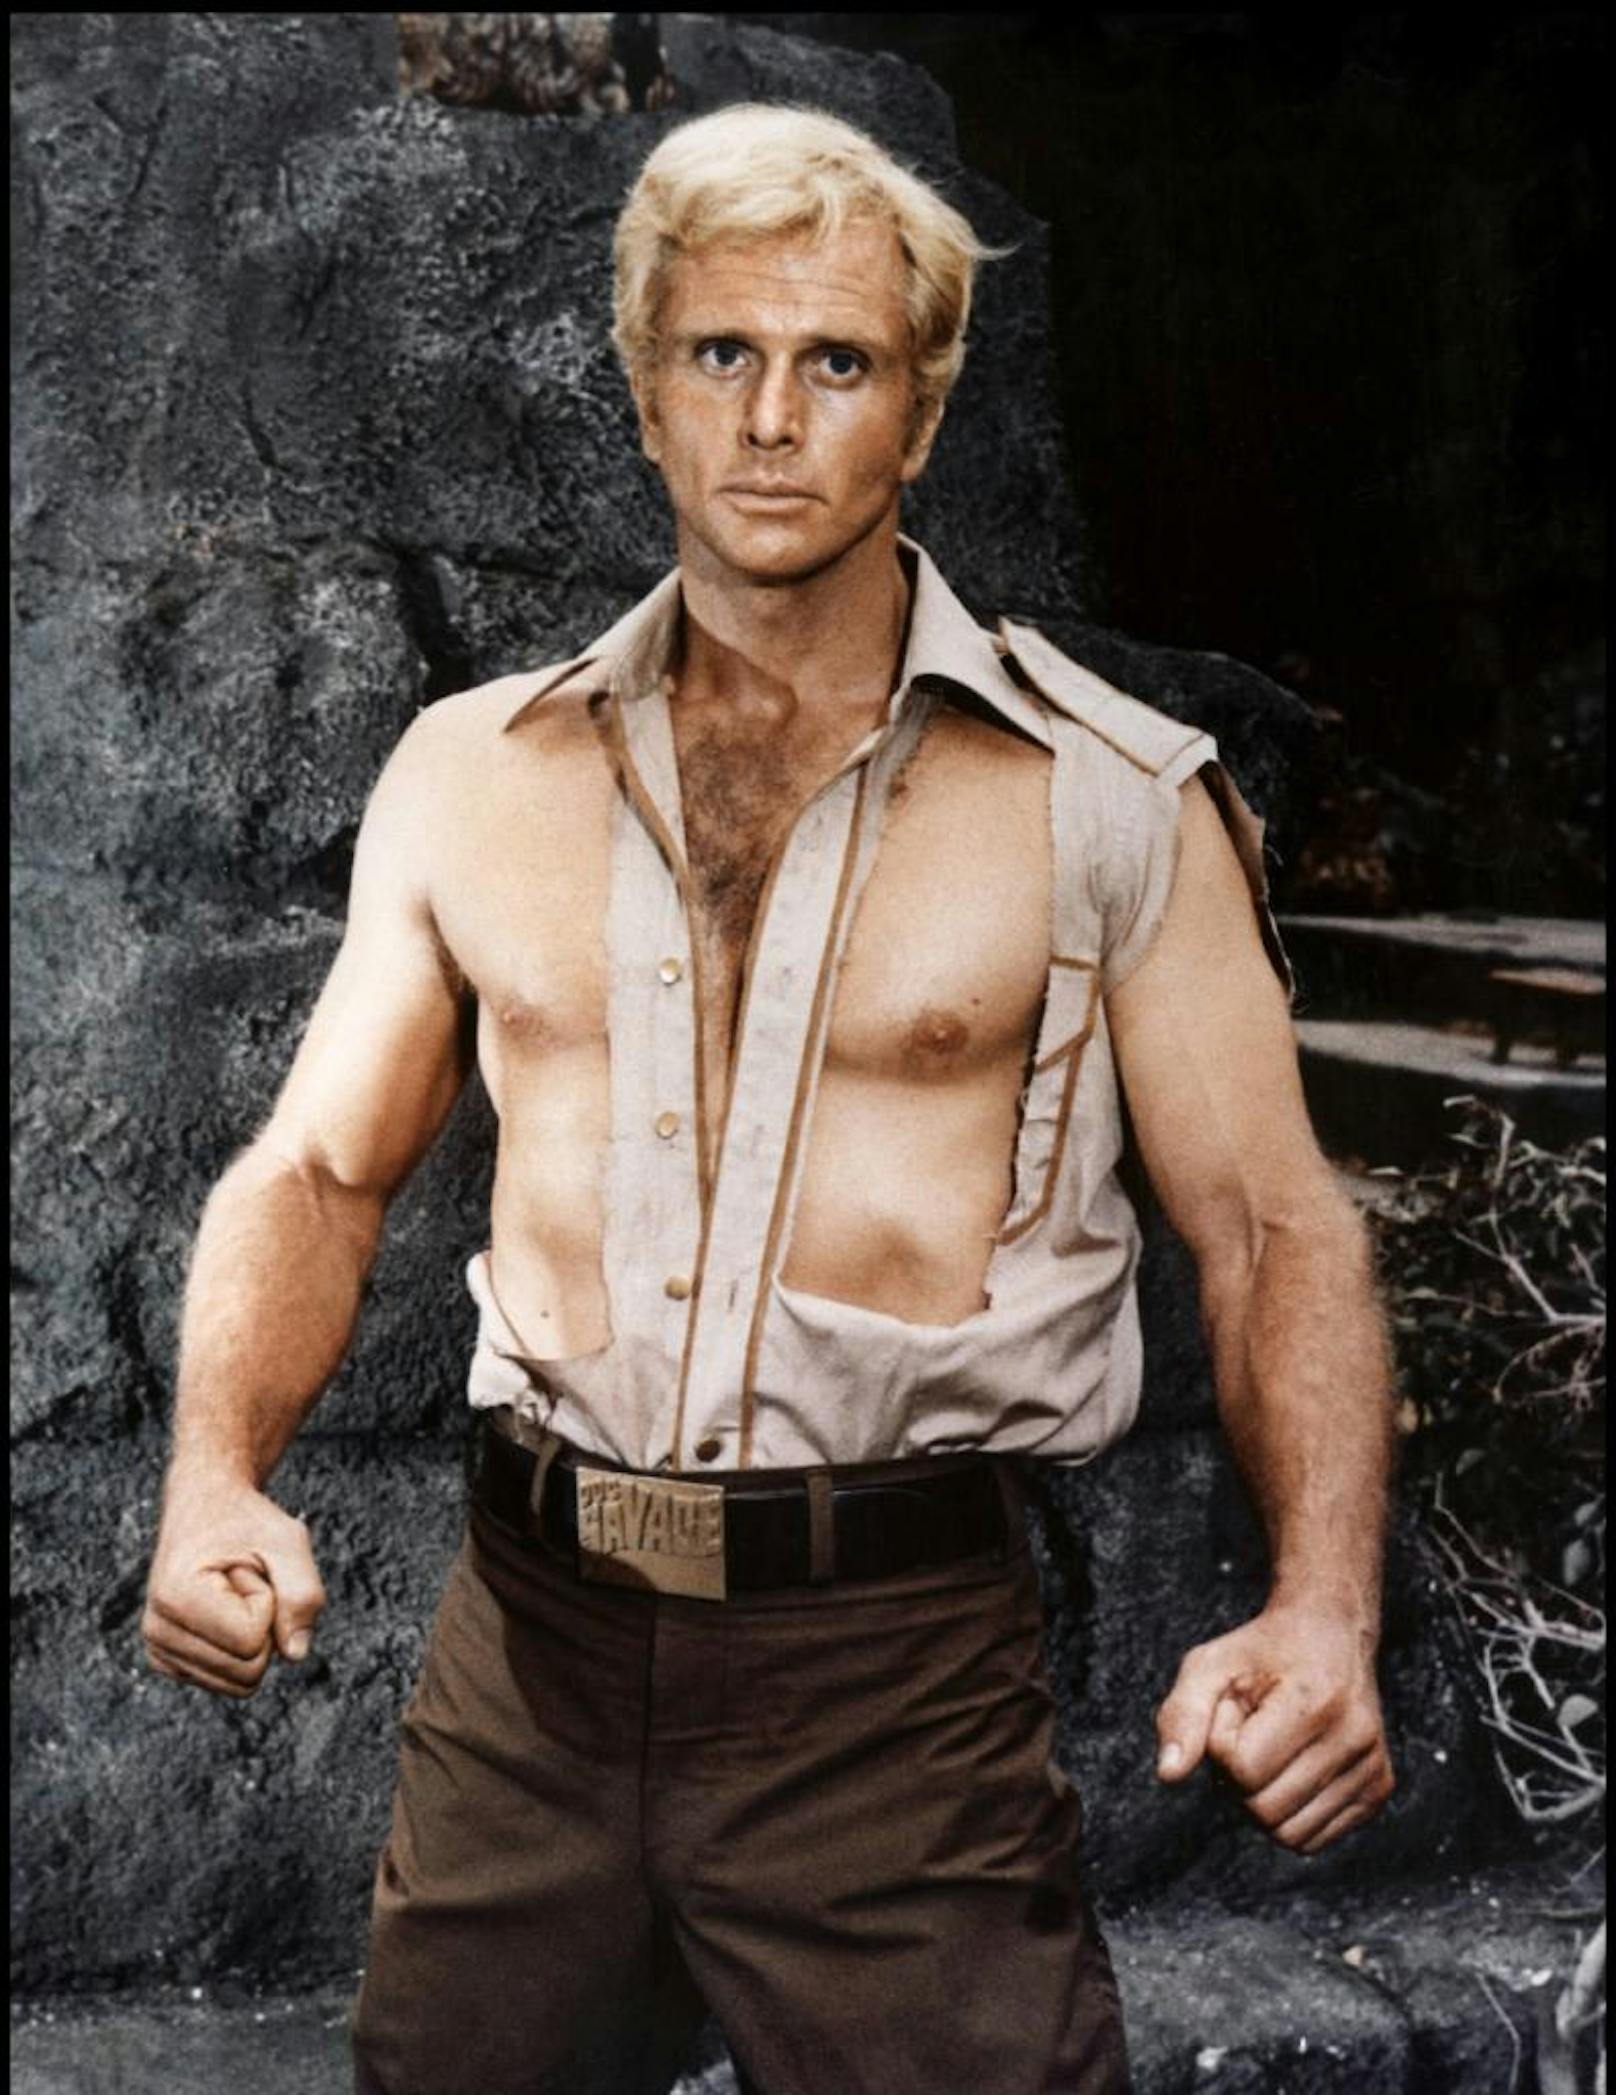 Ron Ely in "Doc Savage - The Man of Bronze" (1975)